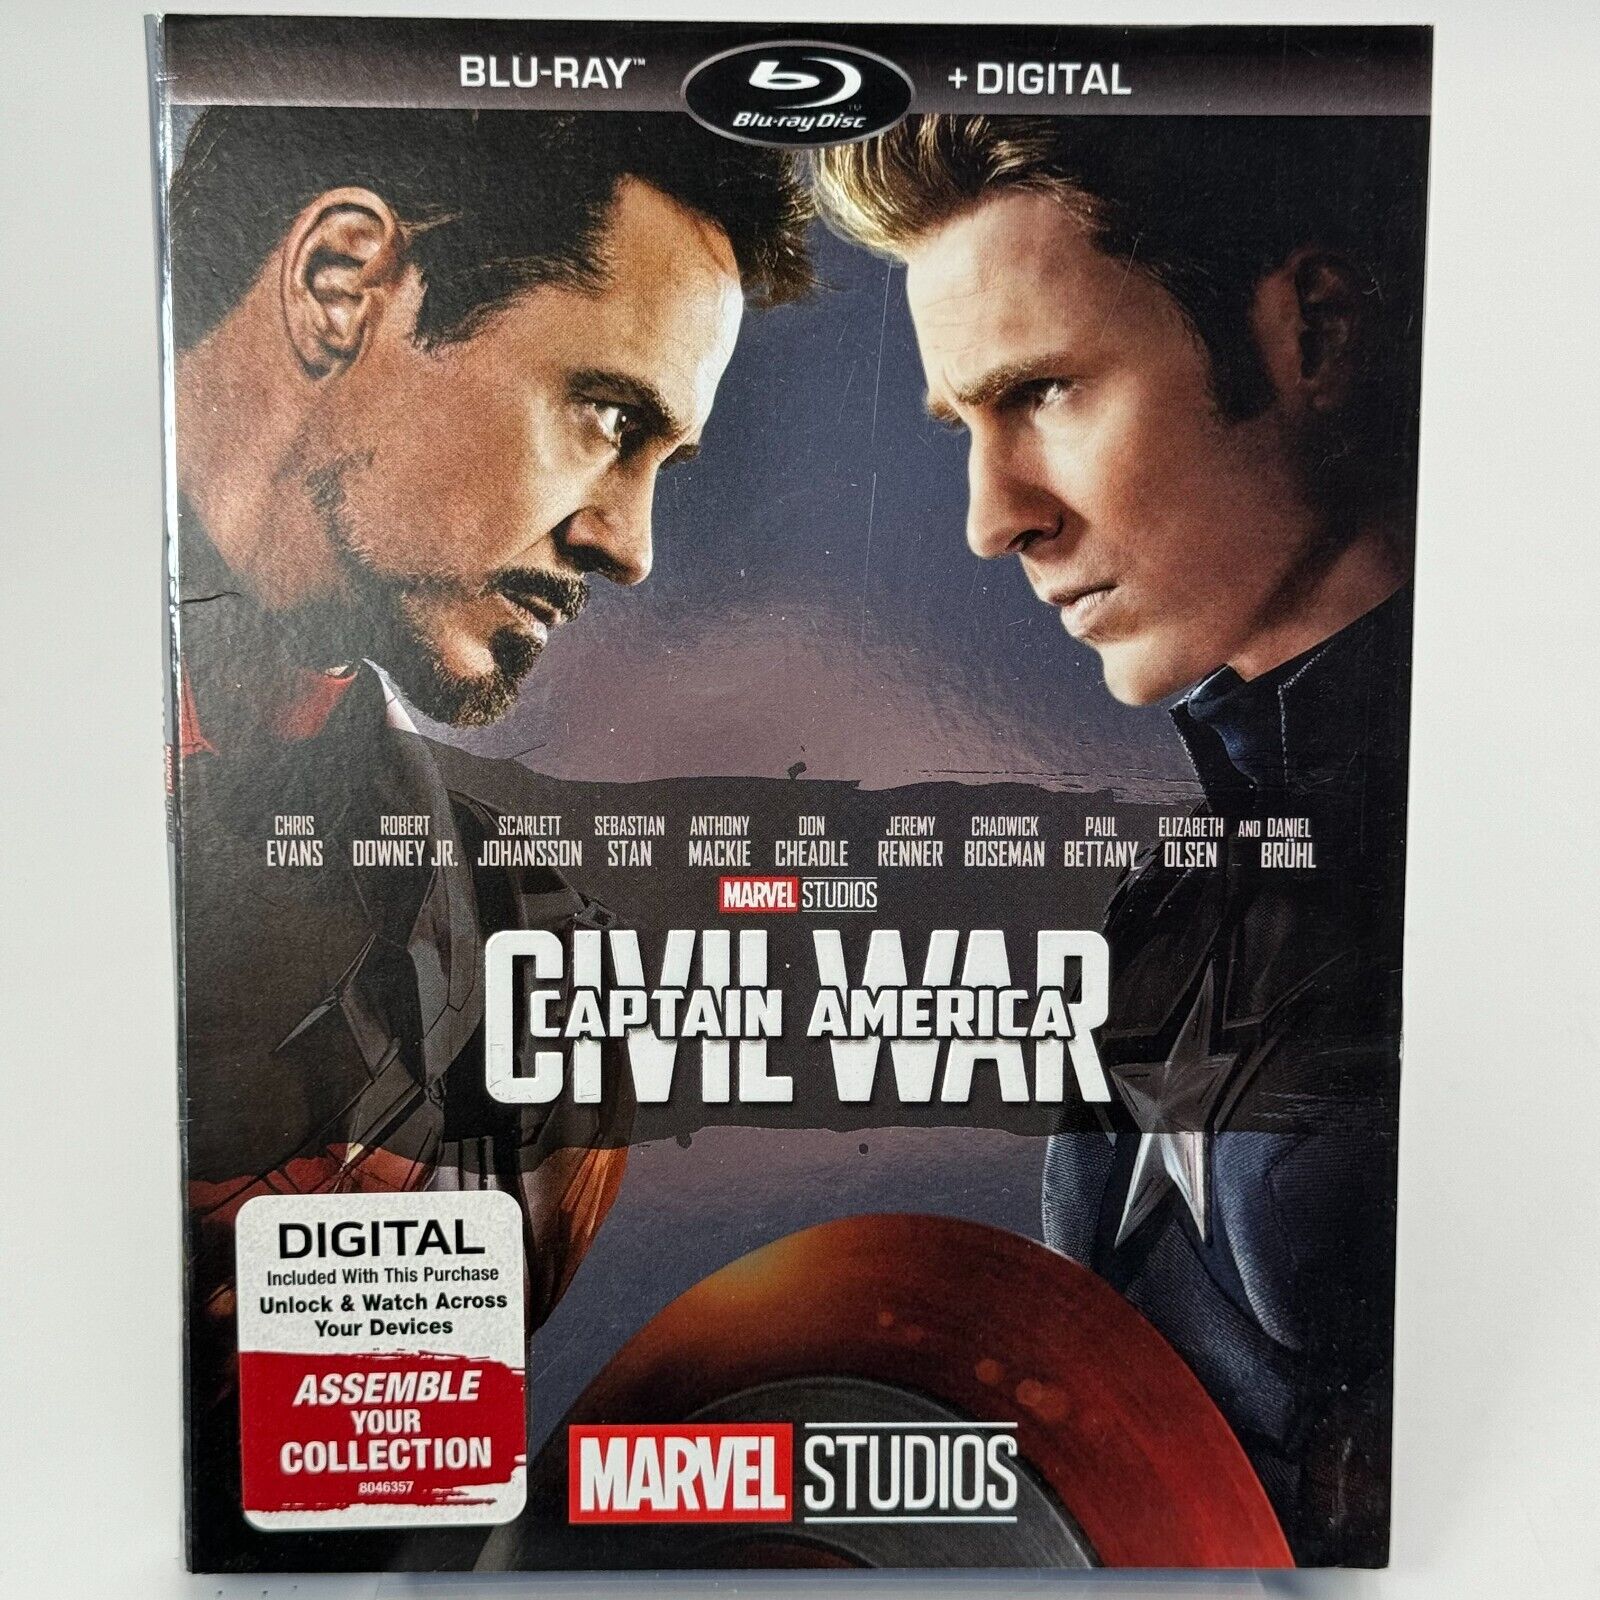 Marvel Universe Movies DVD 10 Film Mixed Collection Avengers Ironman Thor Hulk